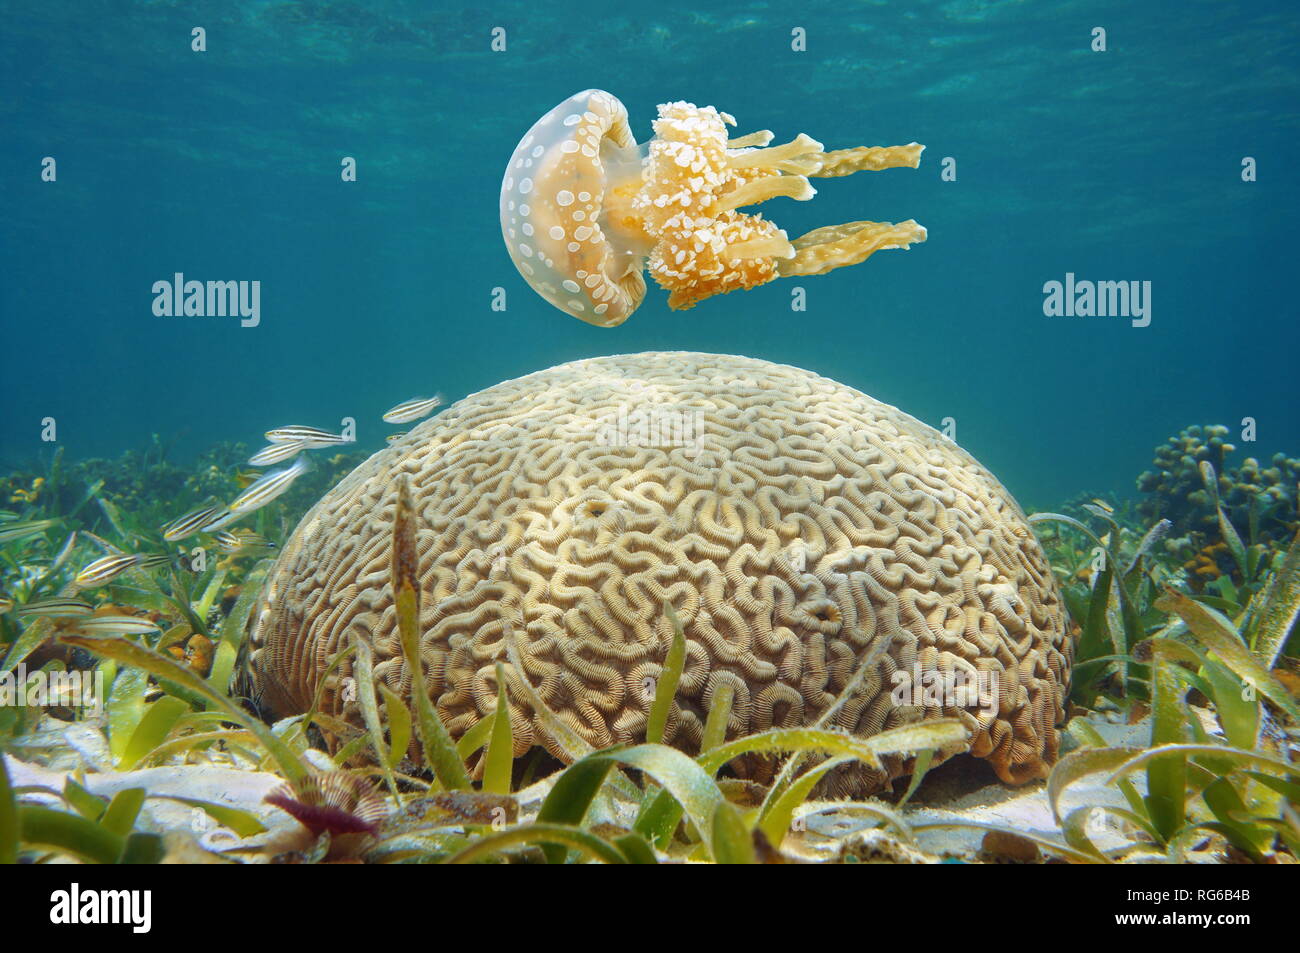 Underwater spotted jellyfish and brain coral in the Caribbean sea Stock Photo